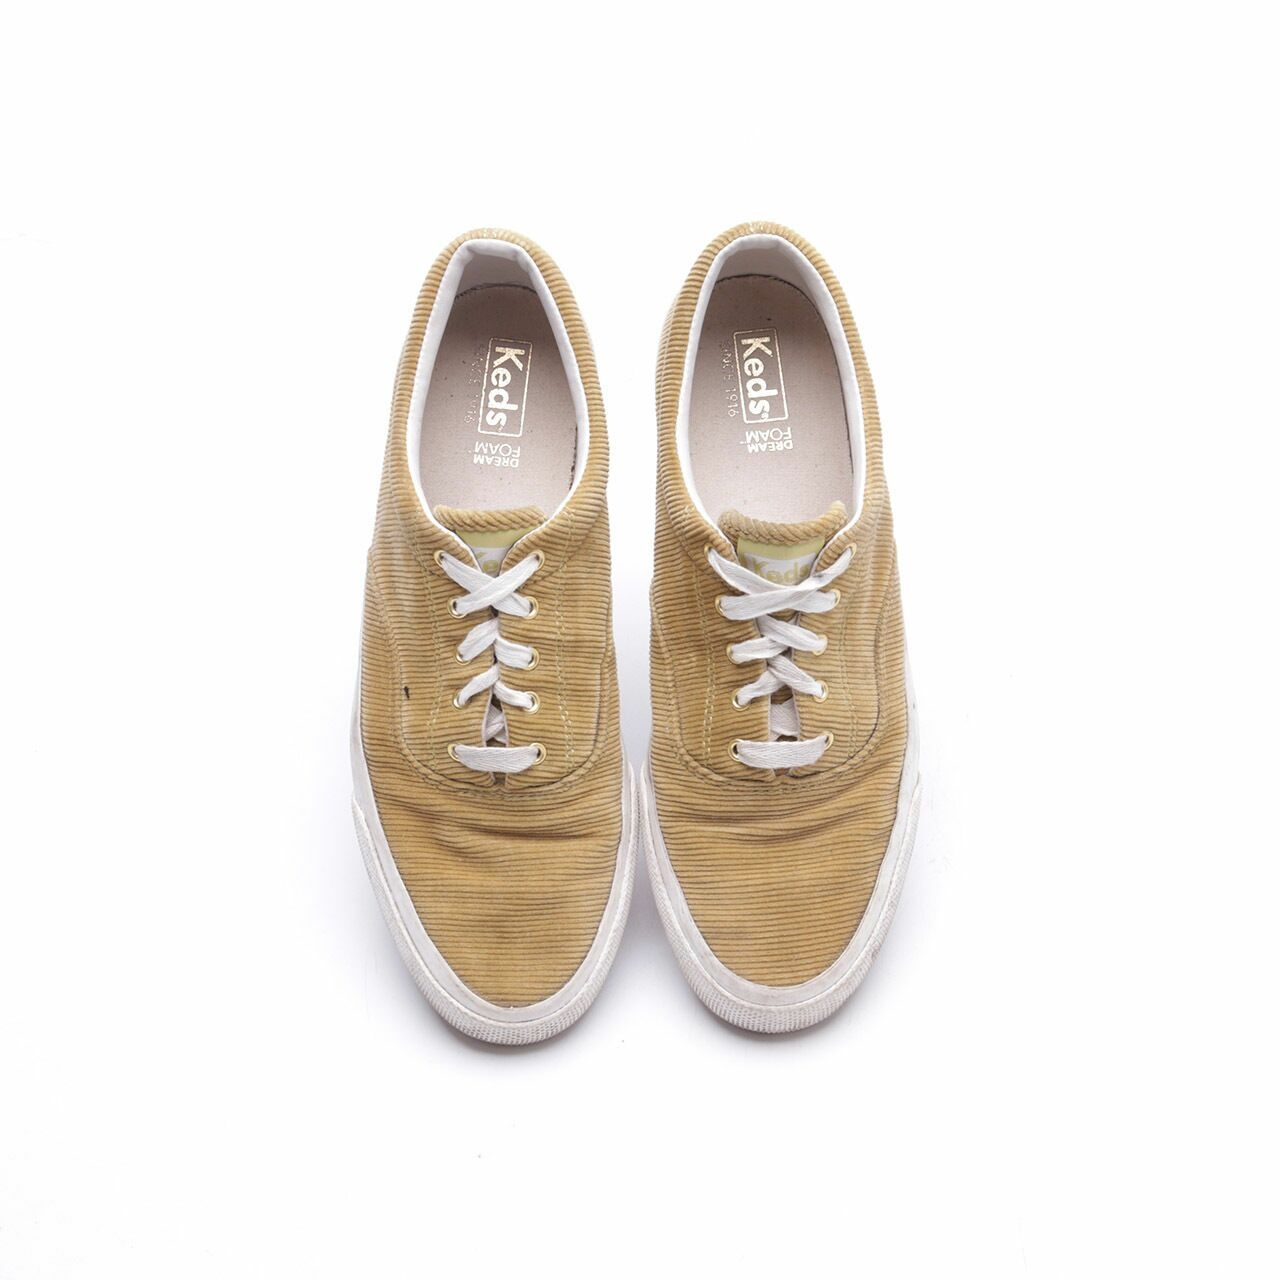 Keds Yellow Curdoroy Sneakers